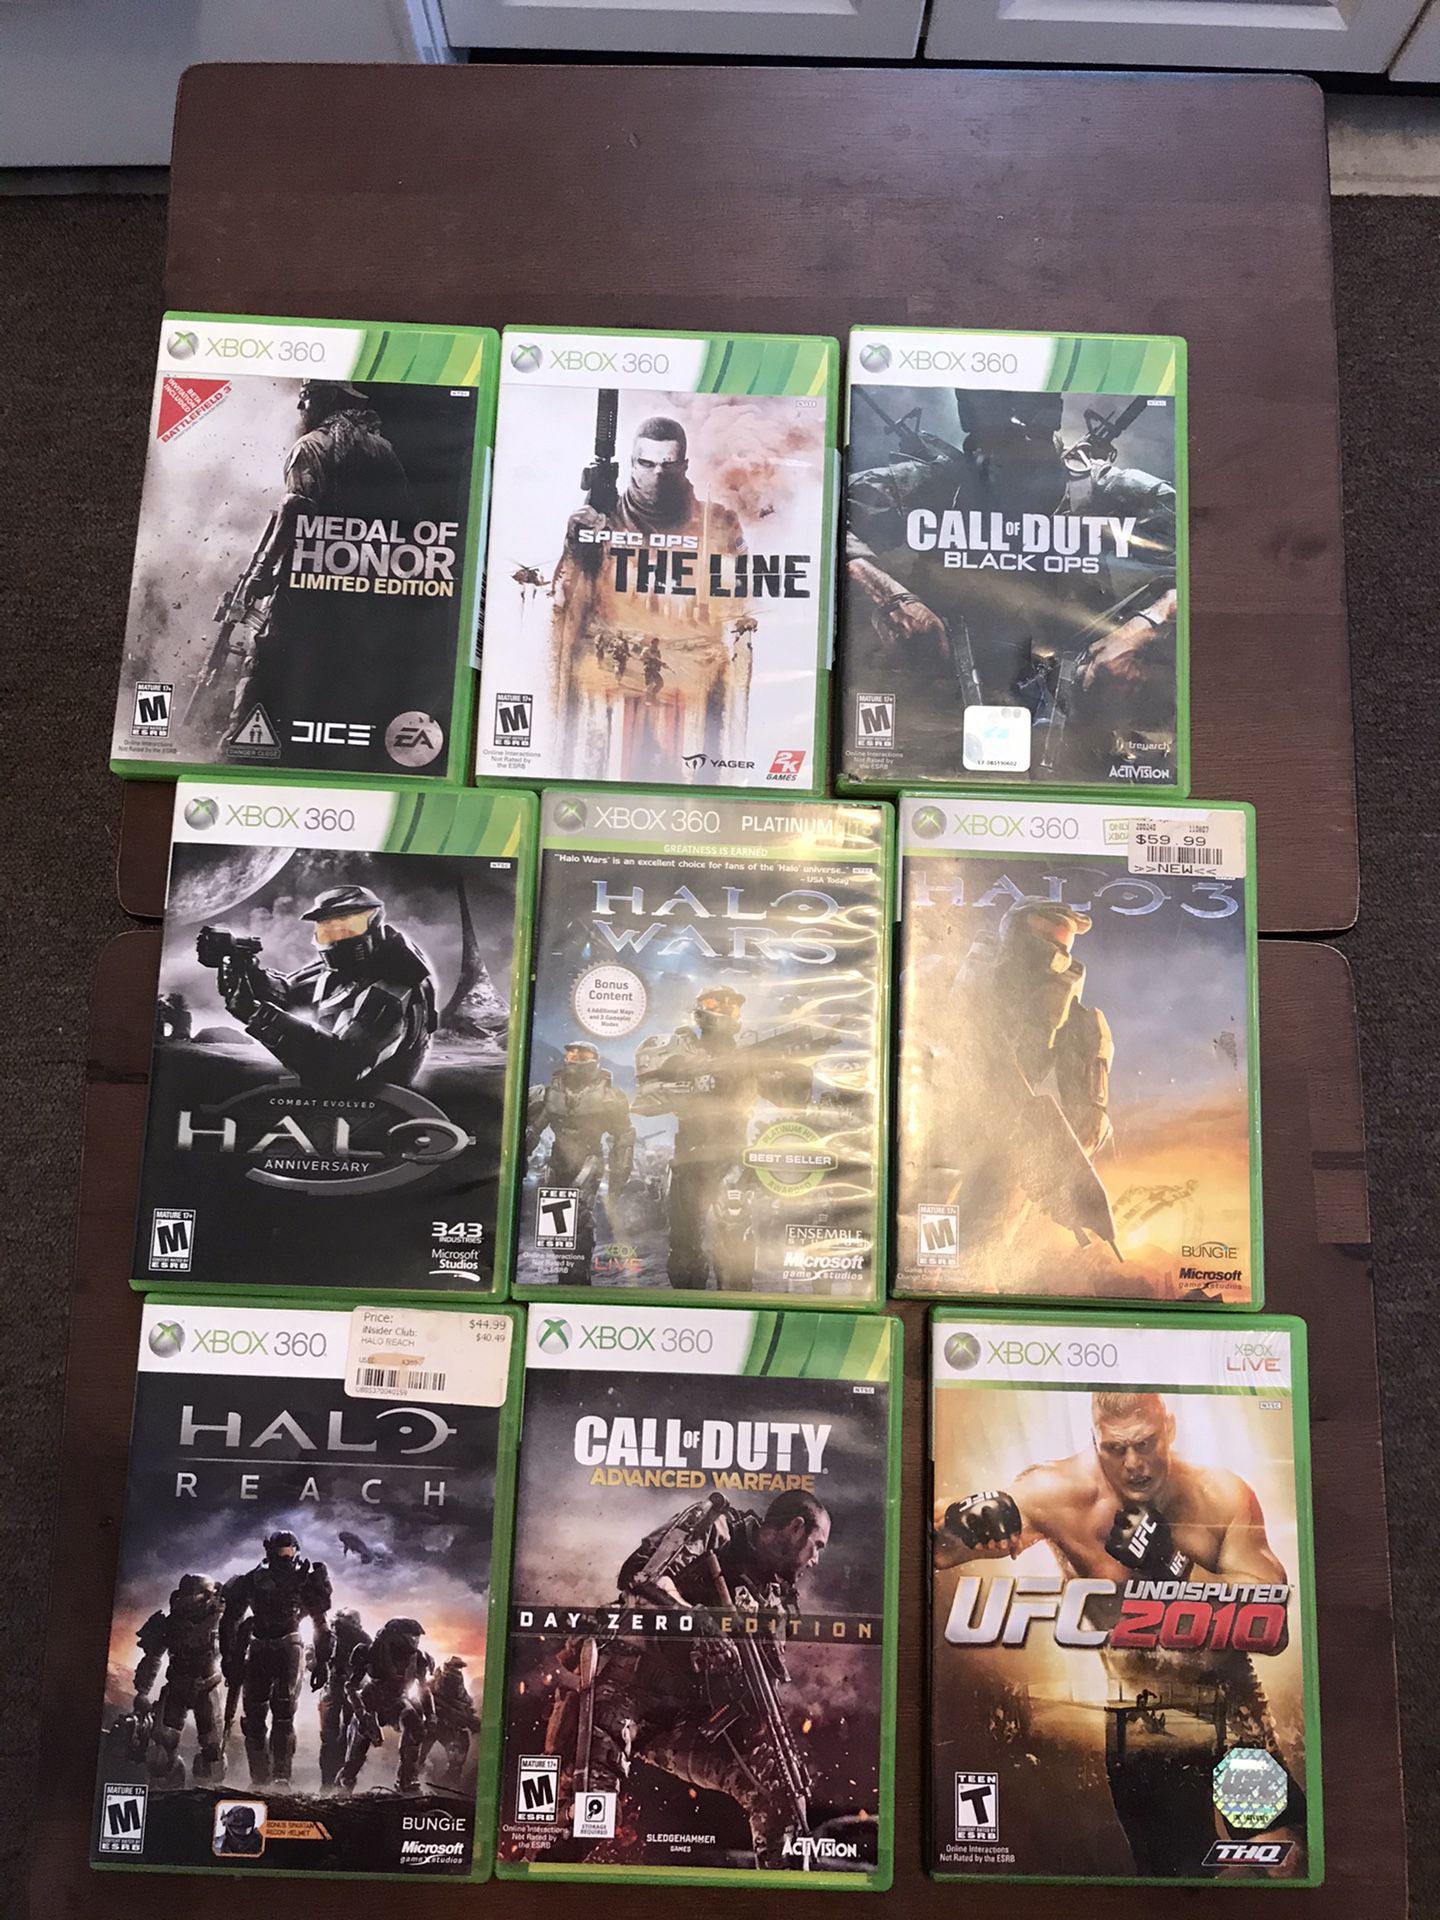 Xbox 360 games used sold as the set not individually